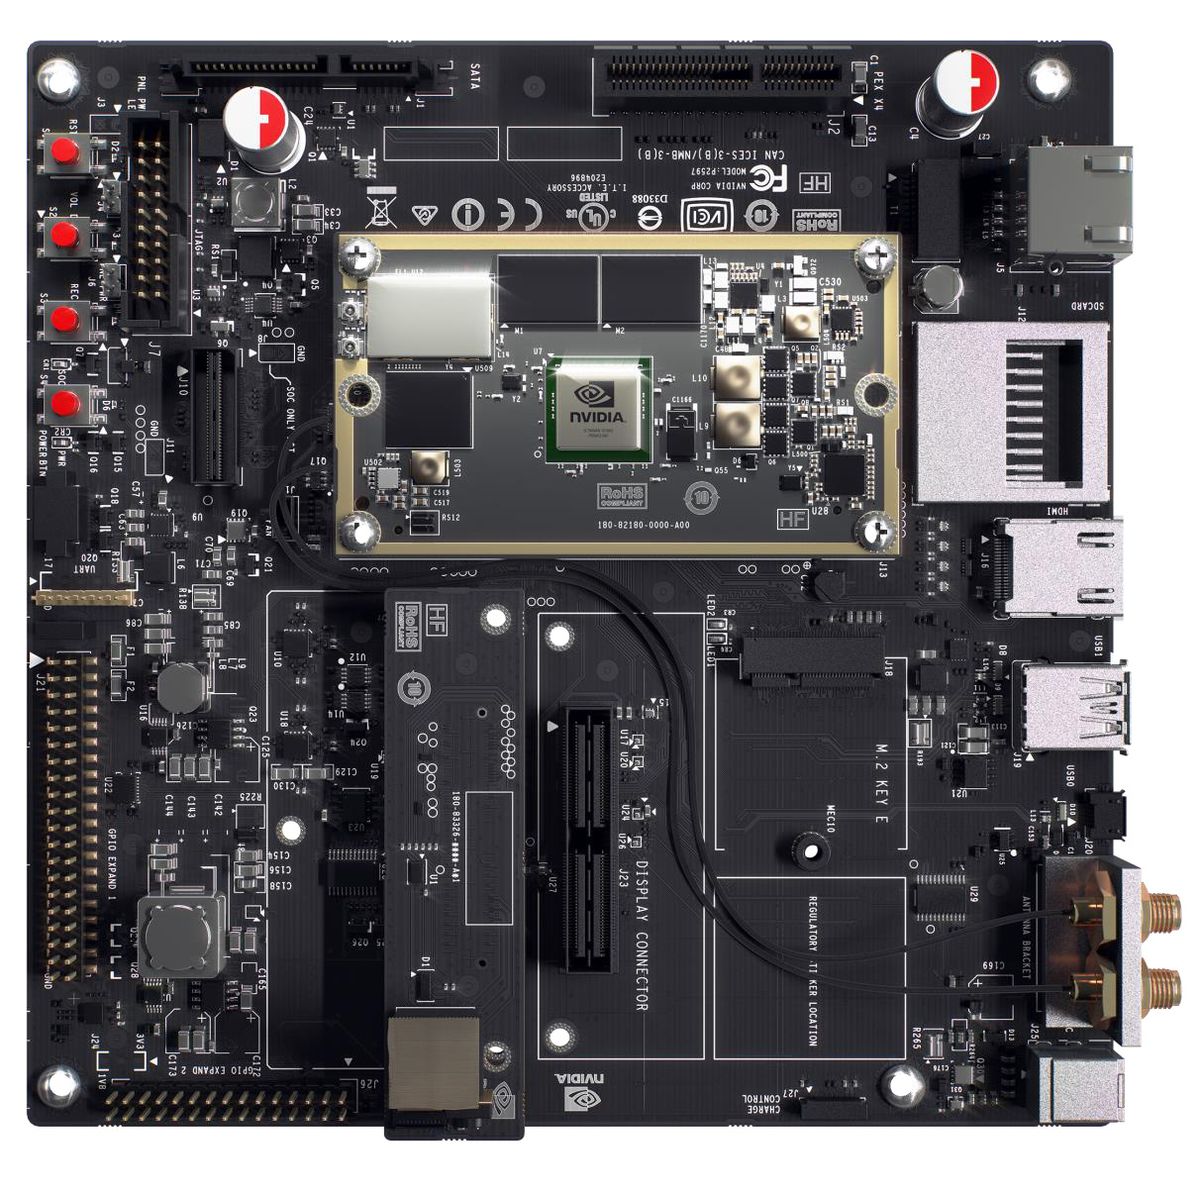 Nvidia's ARM Jetson TX1 can actually compete with an Intel i7 